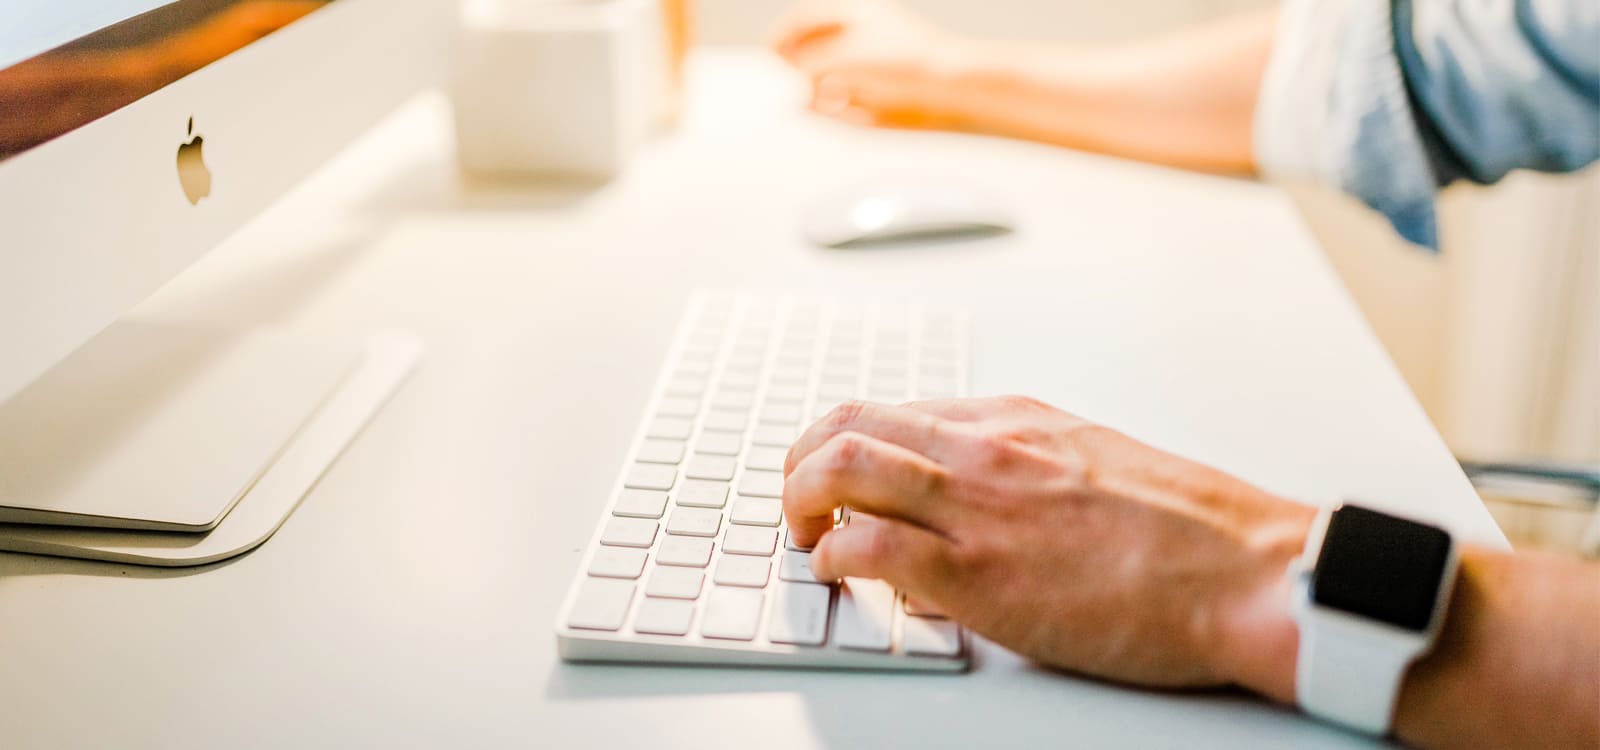 person typing on Apple computer keyboard